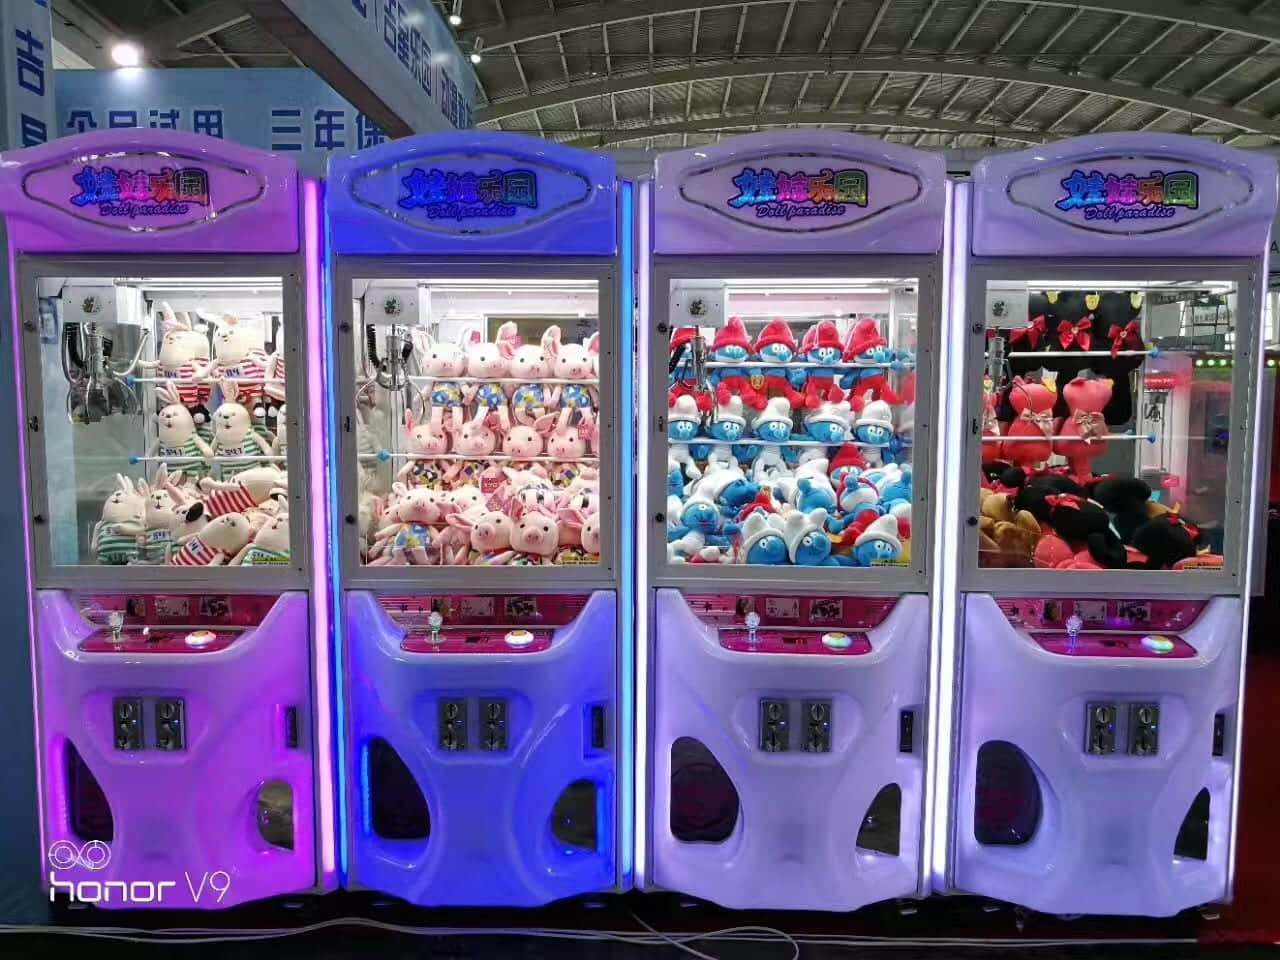 How to start a claw machine business?